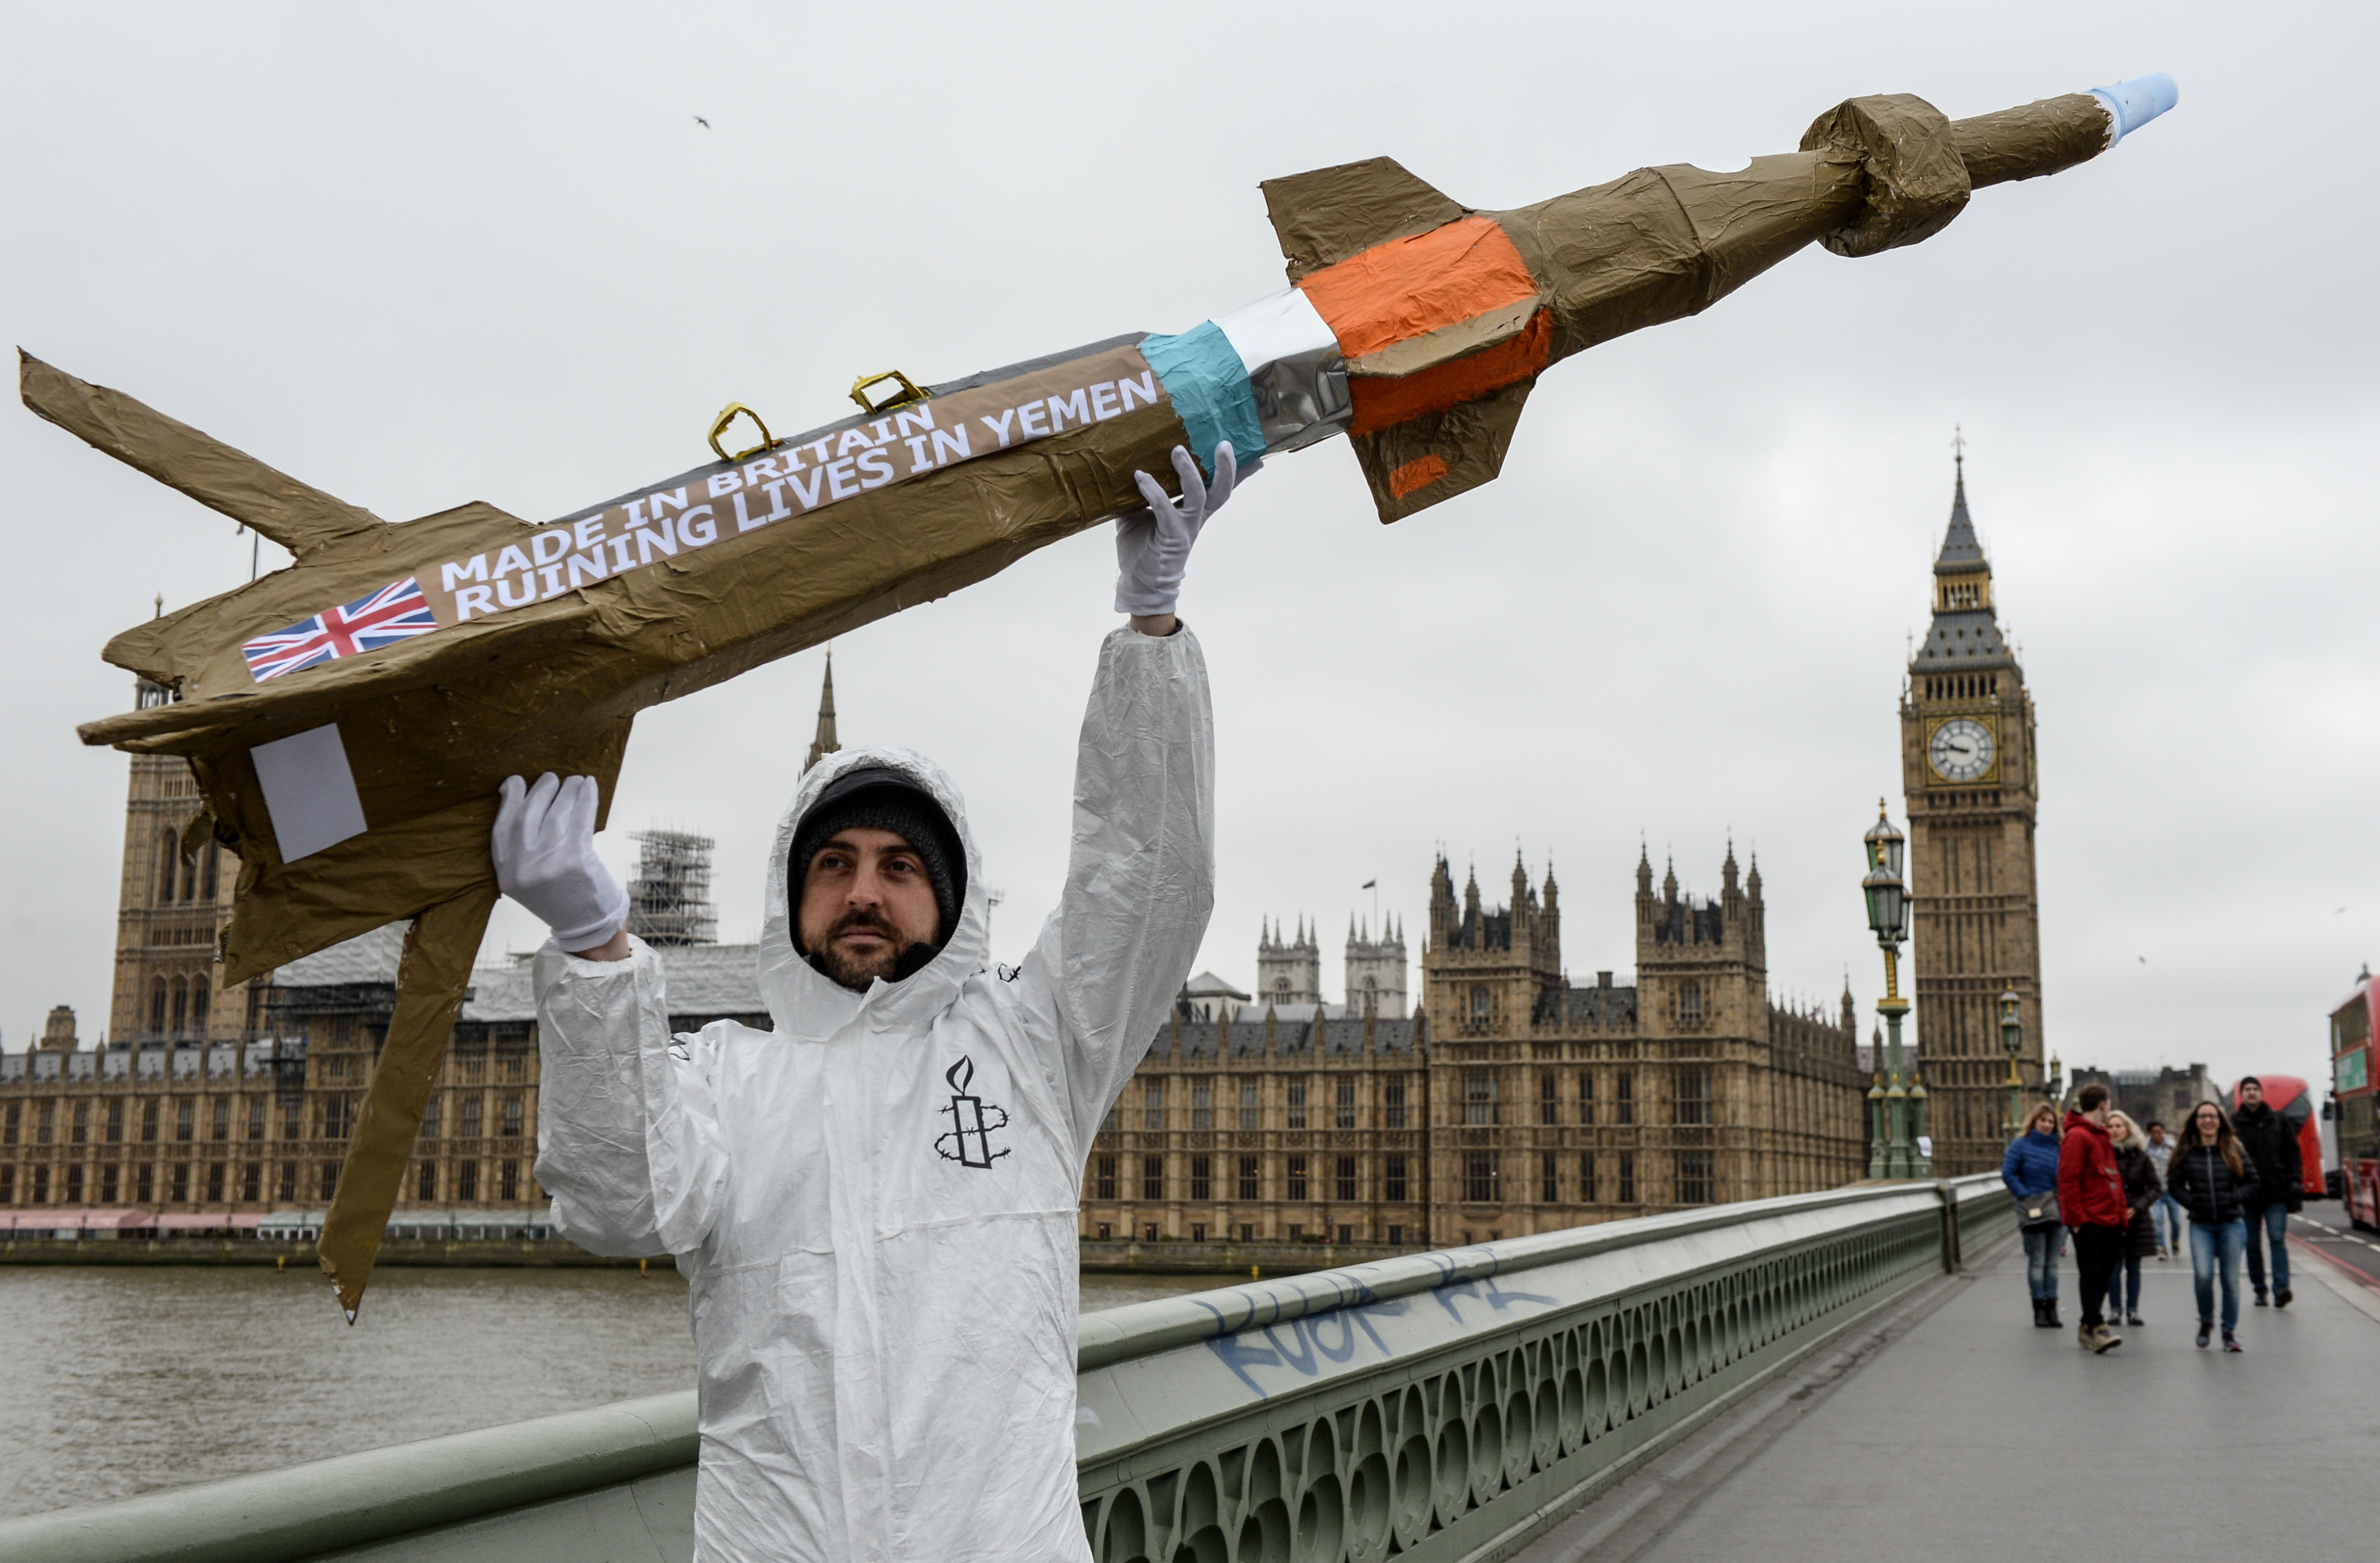 LONDON, ENGLAND - MARCH 18: Amnesty International activists march with homemade replica missiles bearing the message 'Made in Britain, destroying lives in Yemen' across Westminster Bridge, past Parliament and to Downing Street during a protest over UK arms sales to Saudi Arabia on March 18, 2016 in London, England. The missiles are replicas of the 500lb 'Paveway-IV' weapon which are currently used by Saudi Arabia's UK supplied Eurofighter Typhoon war planes. (Photo by Chris Ratcliffe/Getty Images)